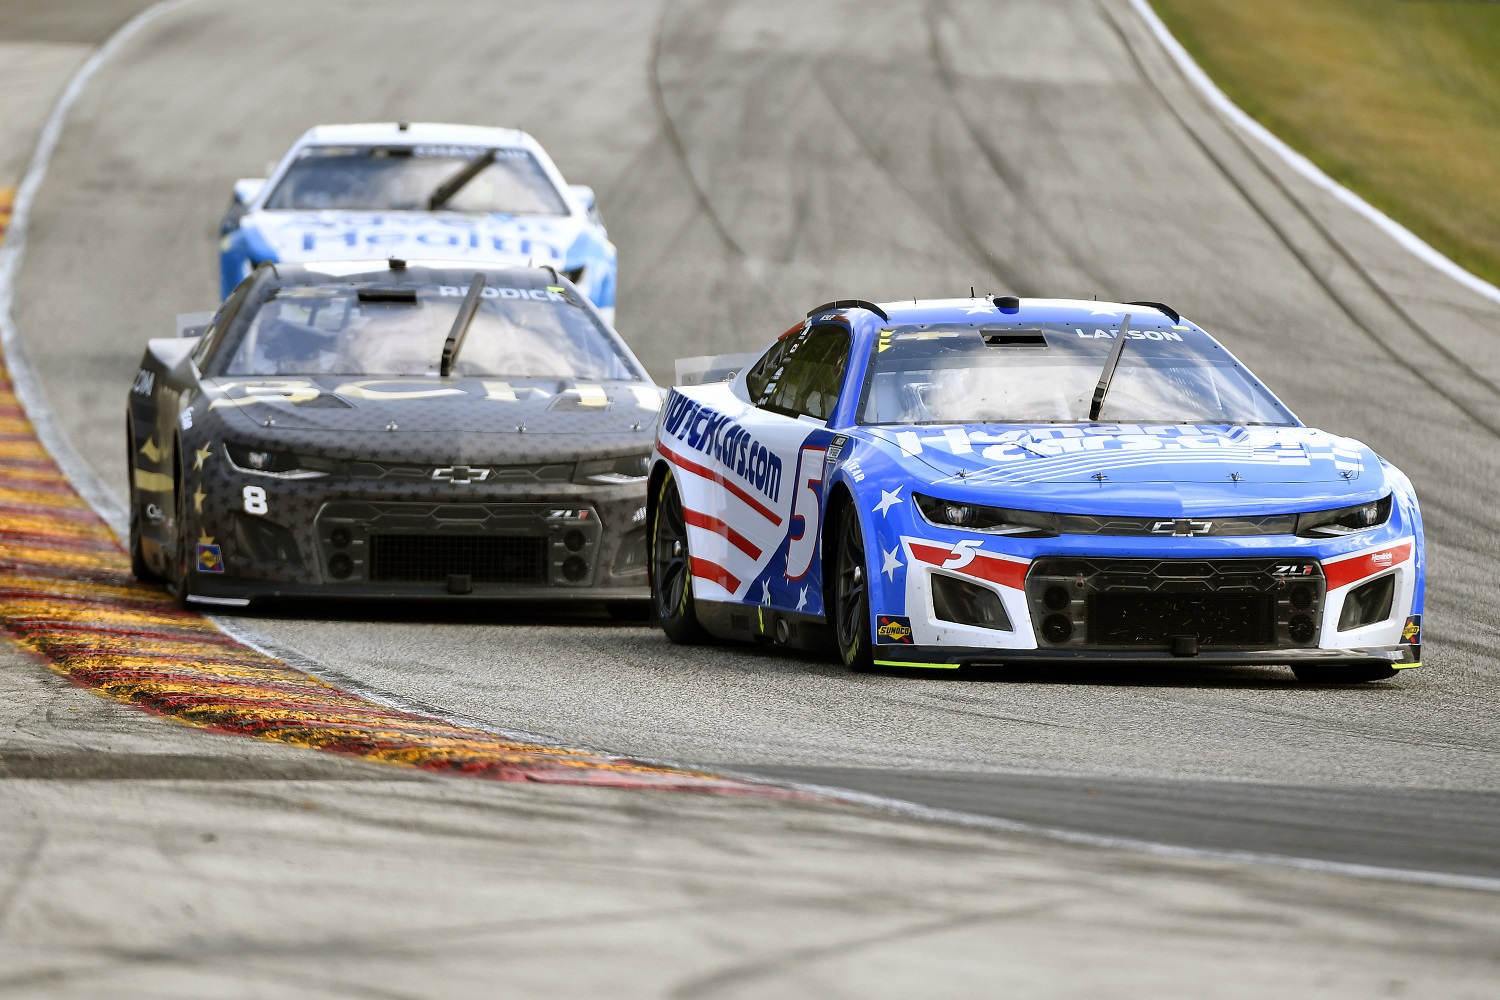 Kyle Larson and Tyler Reddick race during the NASCAR Cup Series Kwik Trip 250 at Road America on July 3, 2022. | Logan Riely/Getty Images